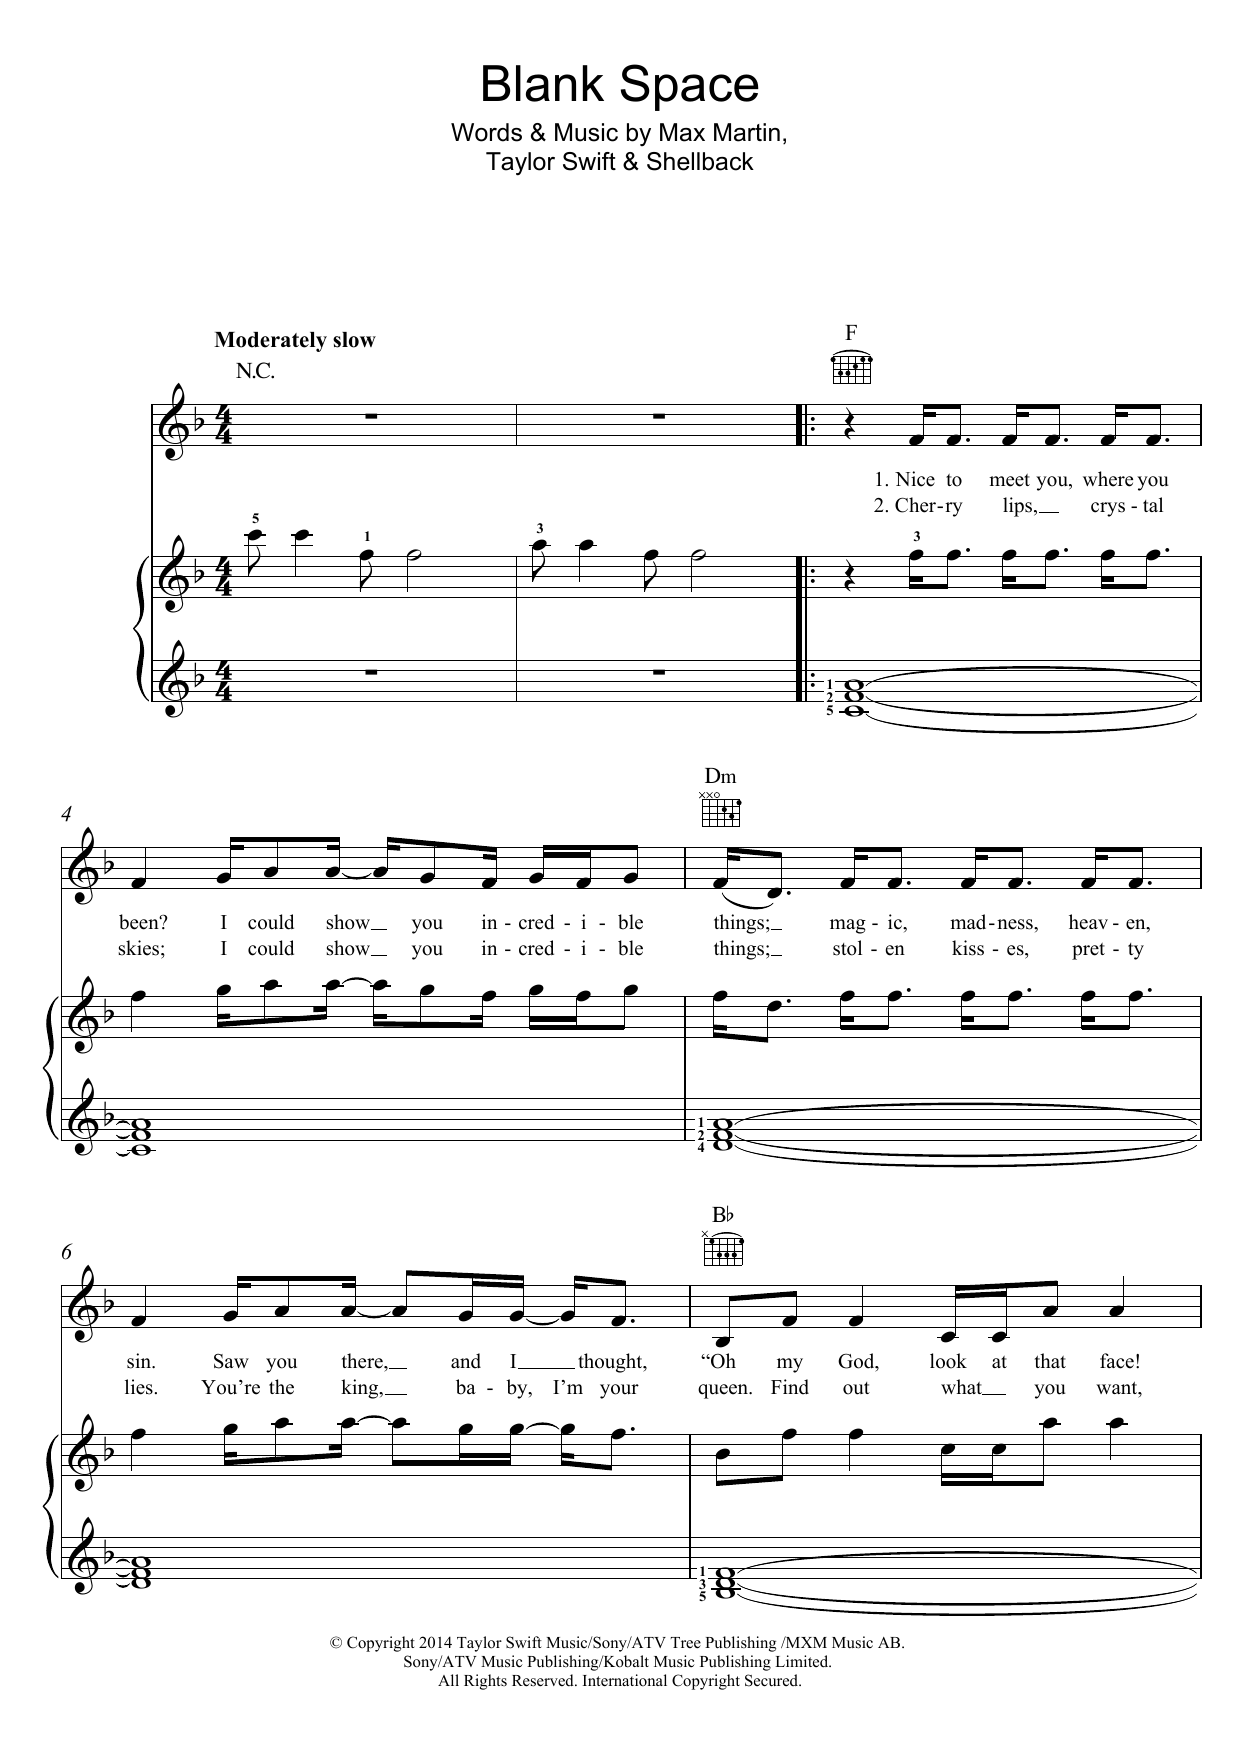 Taylor Swift Blank Space Sheet Music Download Printable Pdf Music Notes Score Chords 174918